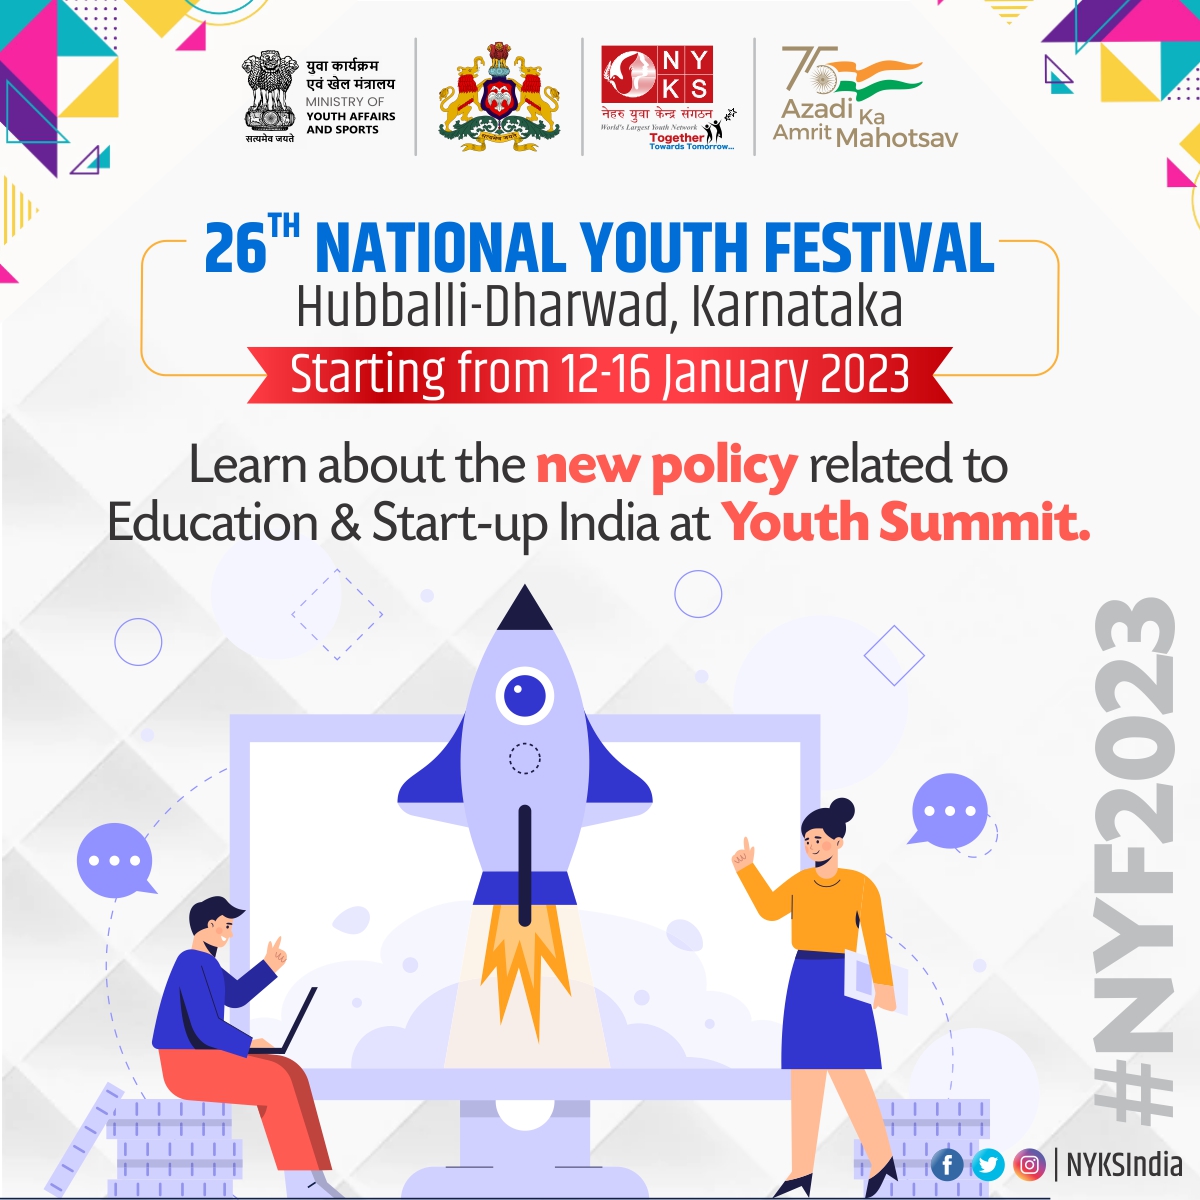 NYF2023: At the Youth Summit Event, find out more about the new education and startup policy in India. For more info visit: nationalyouthfestival2023.com #NYF2023 #NYKSYouthFestival #NationalYouthFestival #Youth